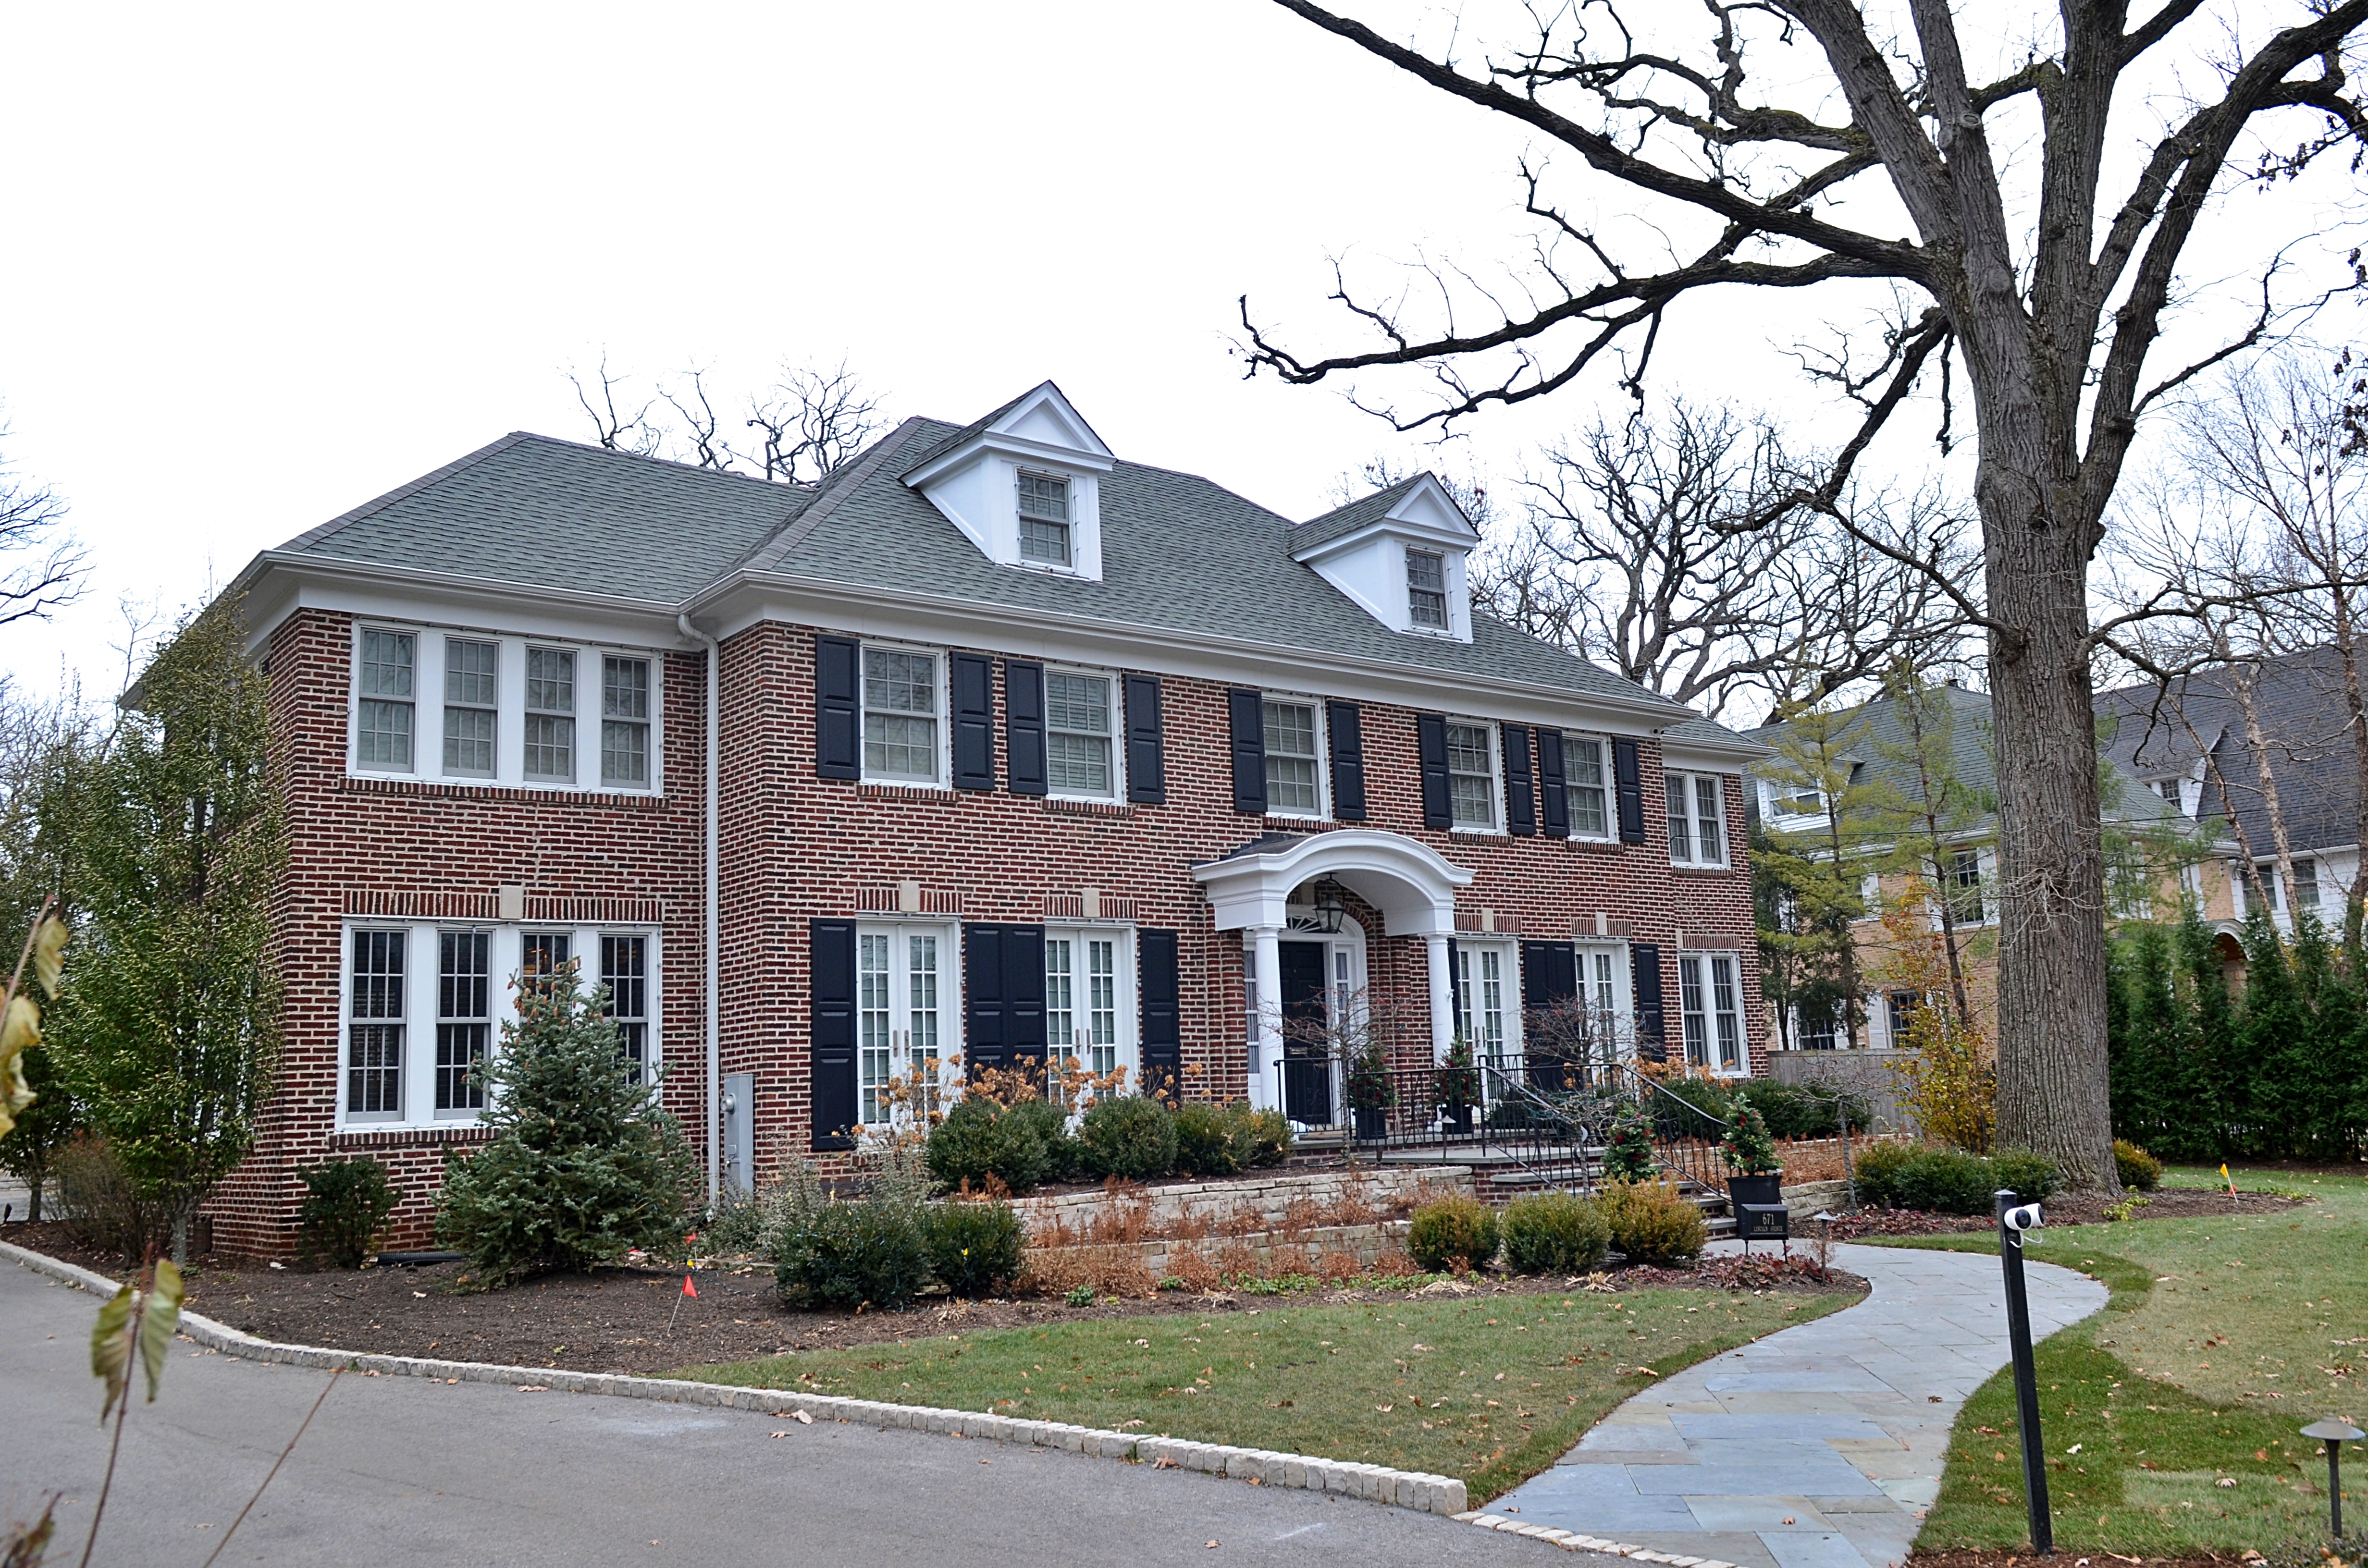 The house as seen in the "Home Alone" films in Winnetka, Illinois in December 2021 | Source: Getty Images